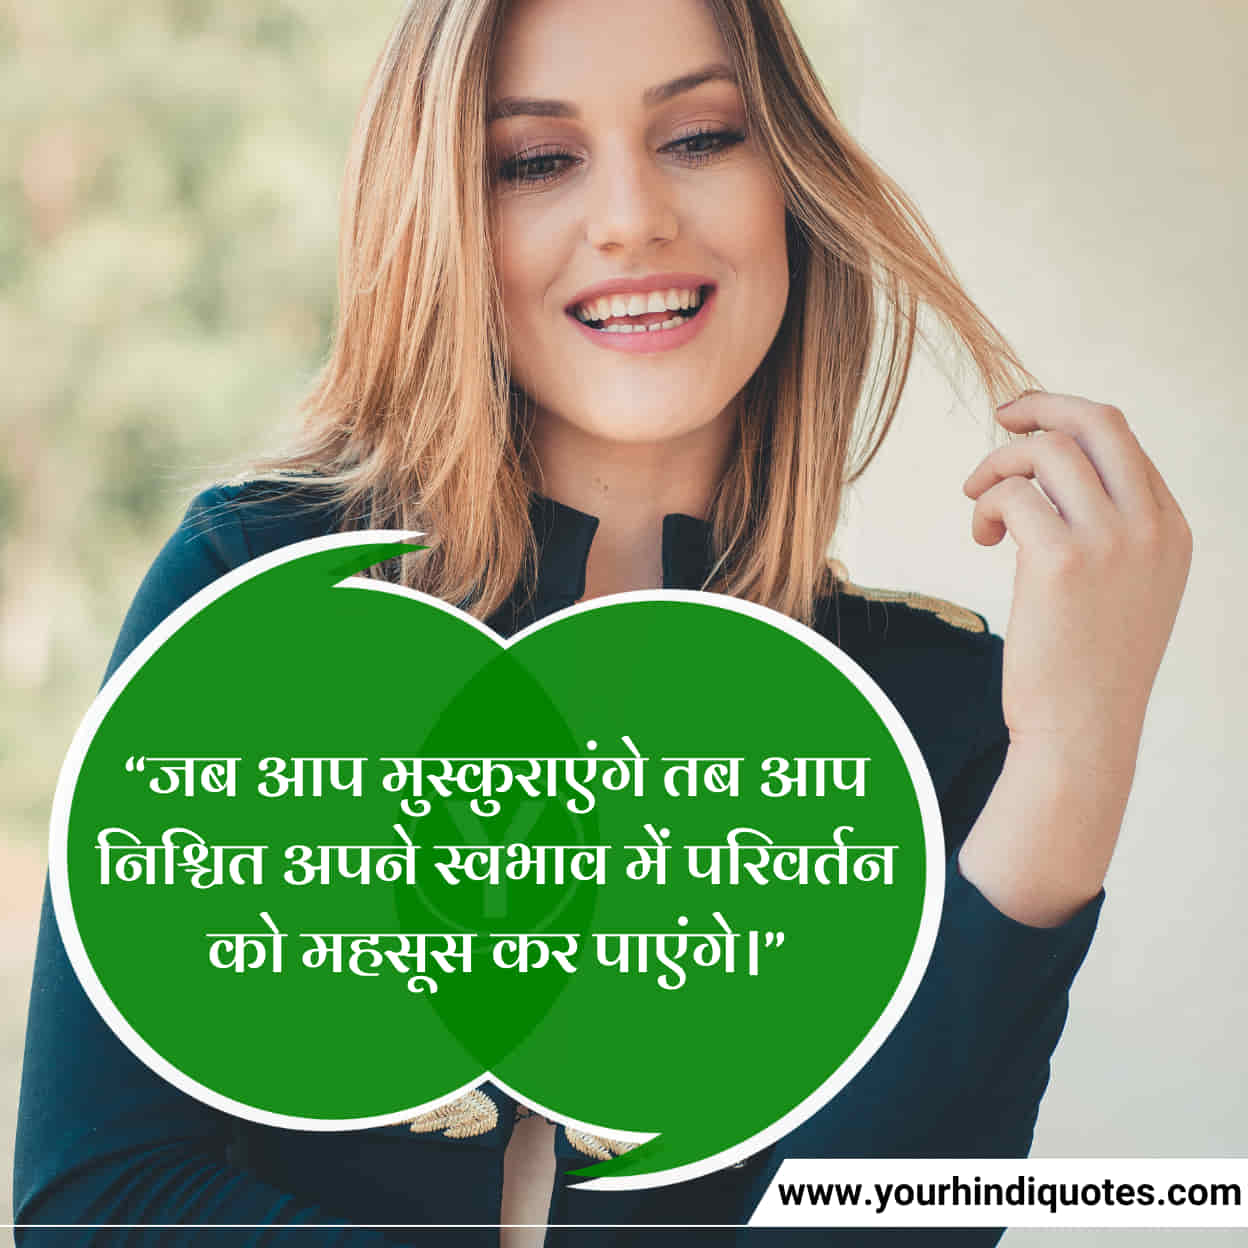 Happy Smile Quotes In Hindi